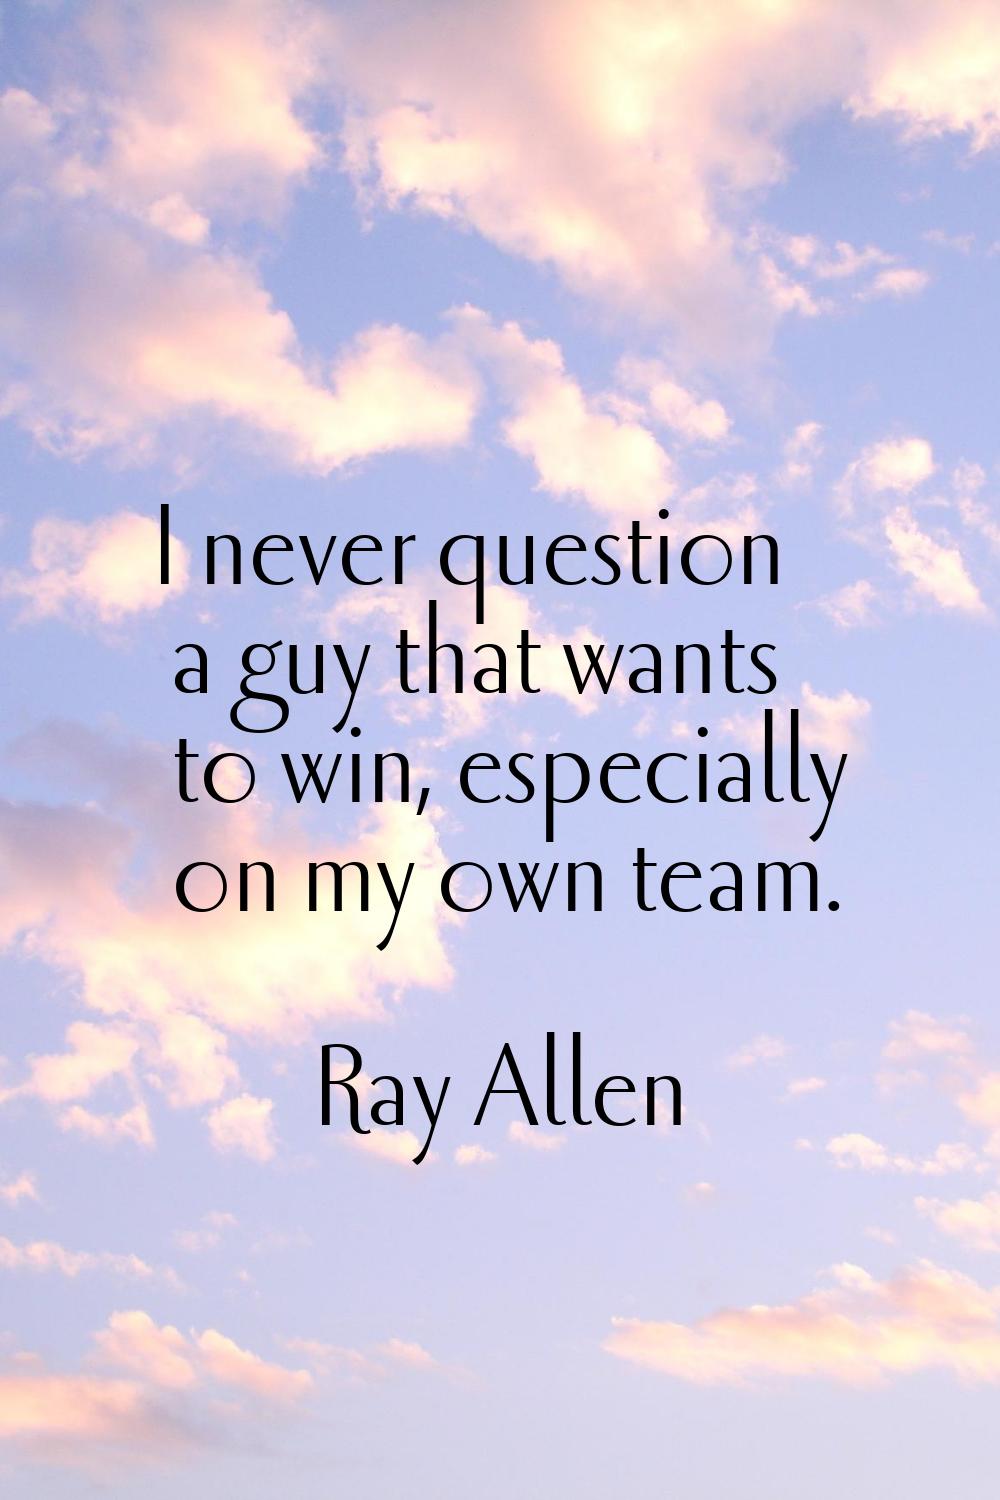 I never question a guy that wants to win, especially on my own team.